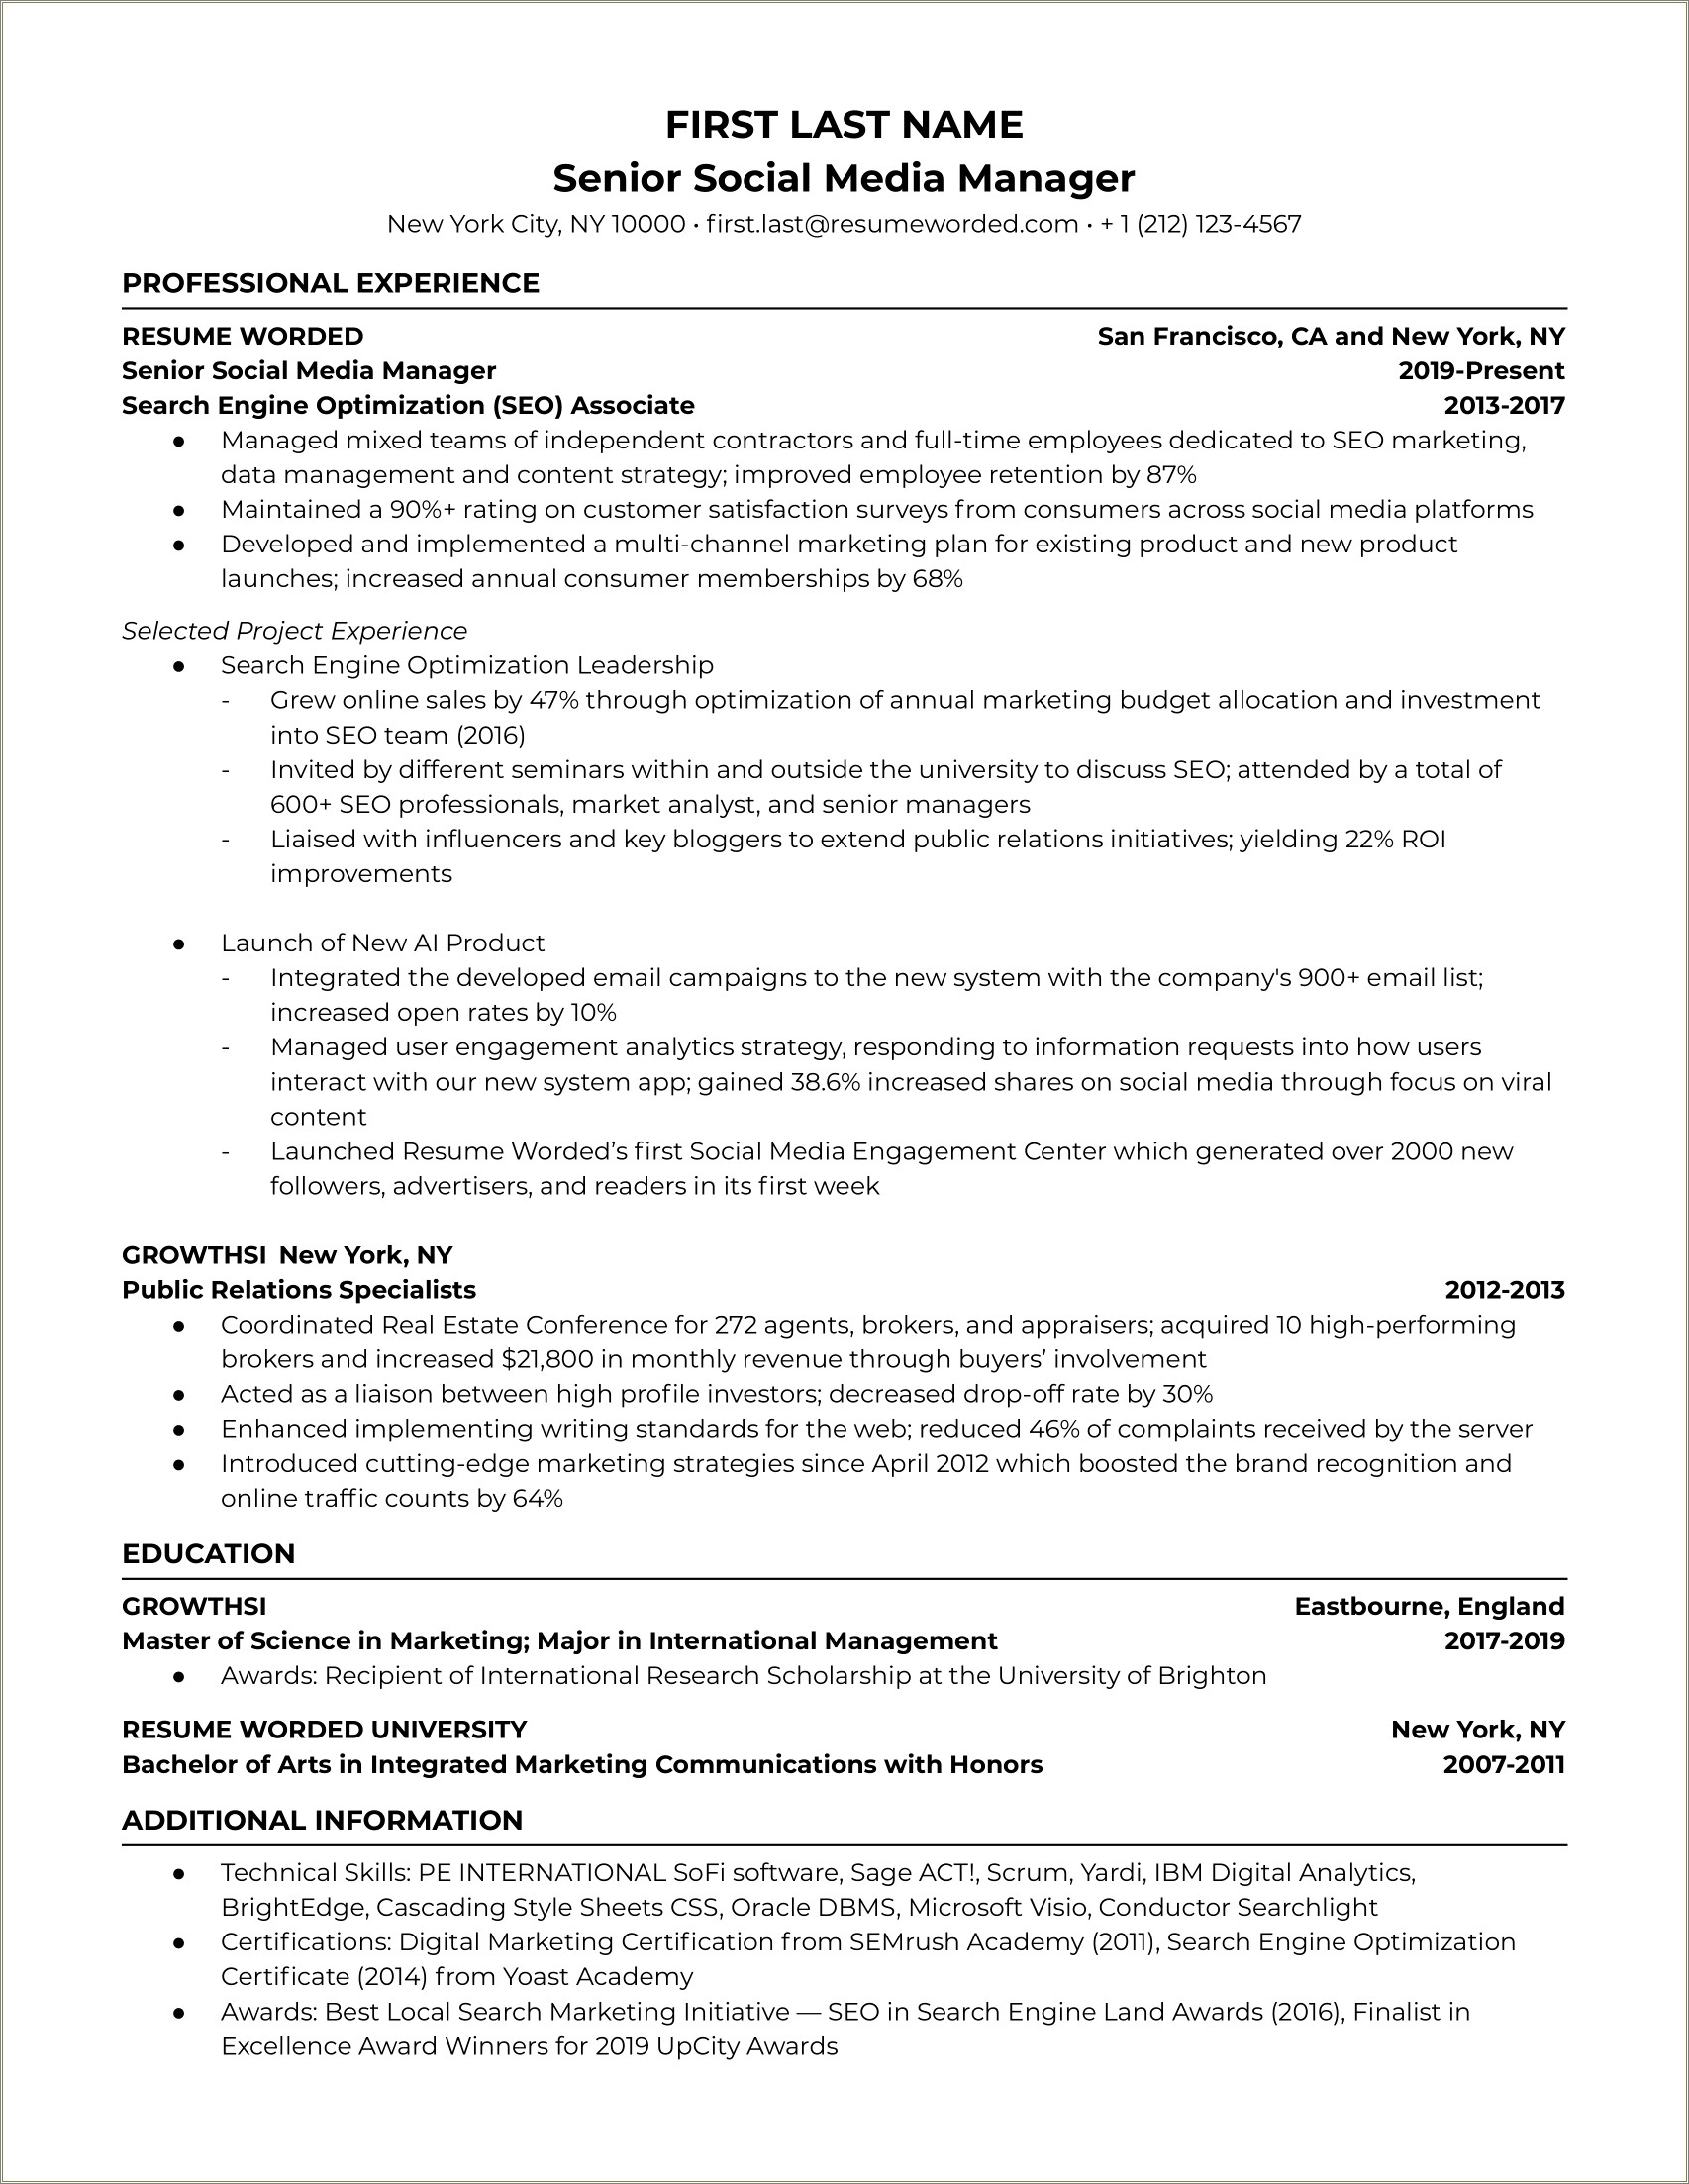 Are Microsoft Word Resume Templates Ats Friendly